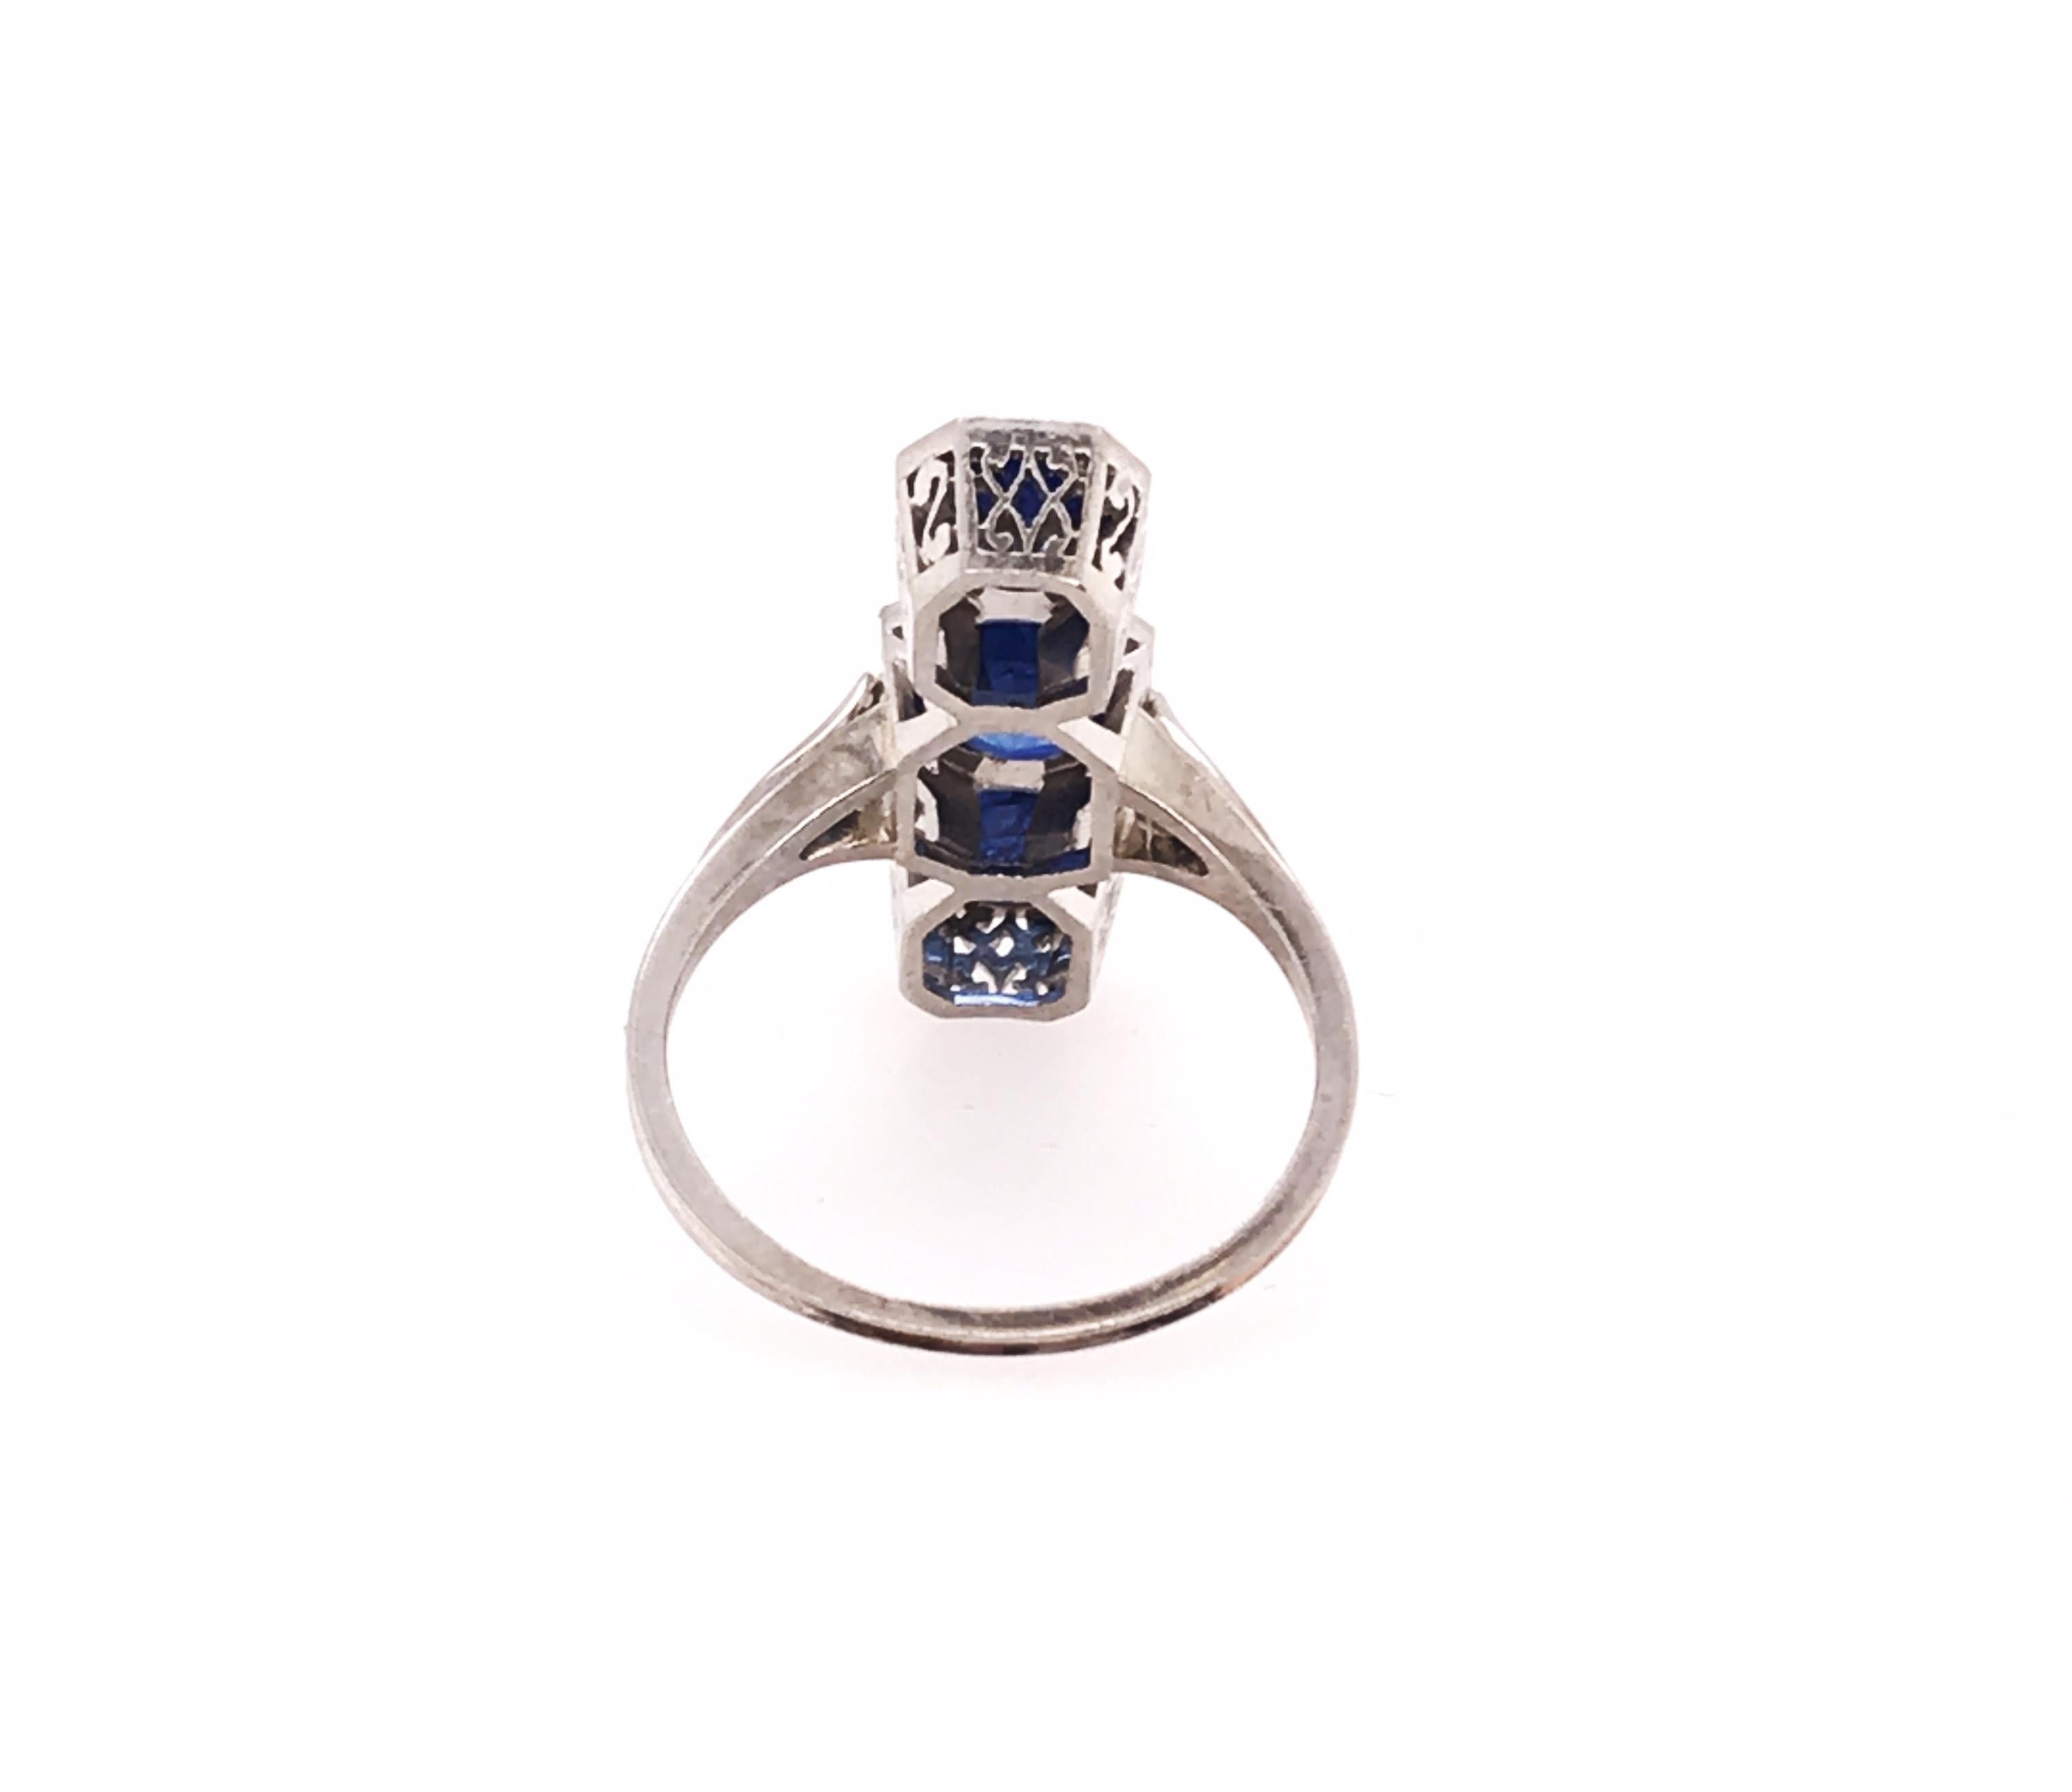 Women's Edwardian 3 Stone Sapphire Ring 3.40ct Round Cut Genuine 1900's Antique 18K For Sale